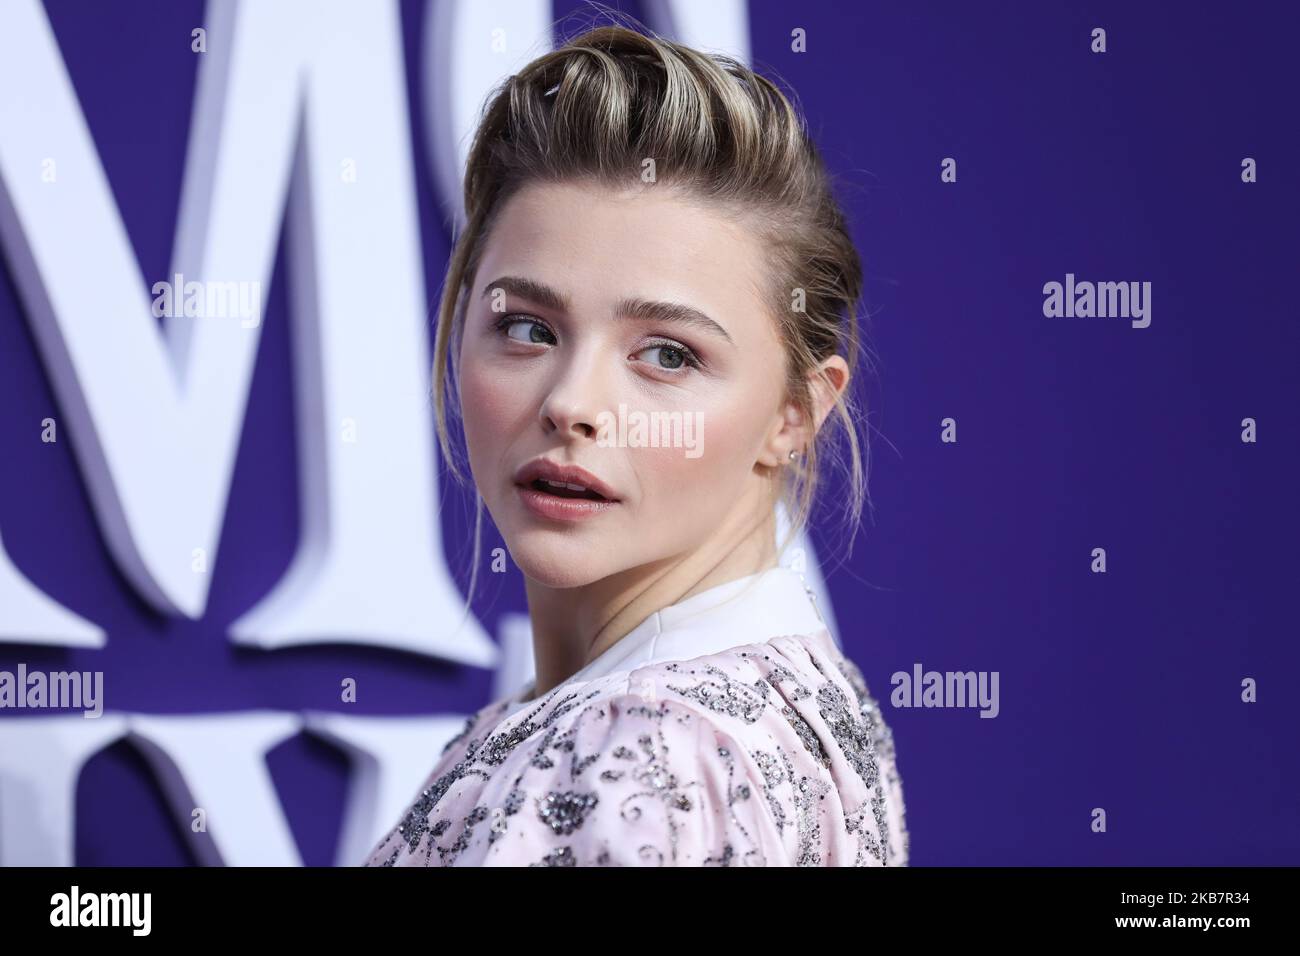 Chloe Grace Moretz attends the 'Movie 43' premiere held at the Chinese  Theatre in Los Angeles, CA, USA on January 23, 2013. Photo by Lionel  Hahn/ABACAPRESS.COM Stock Photo - Alamy